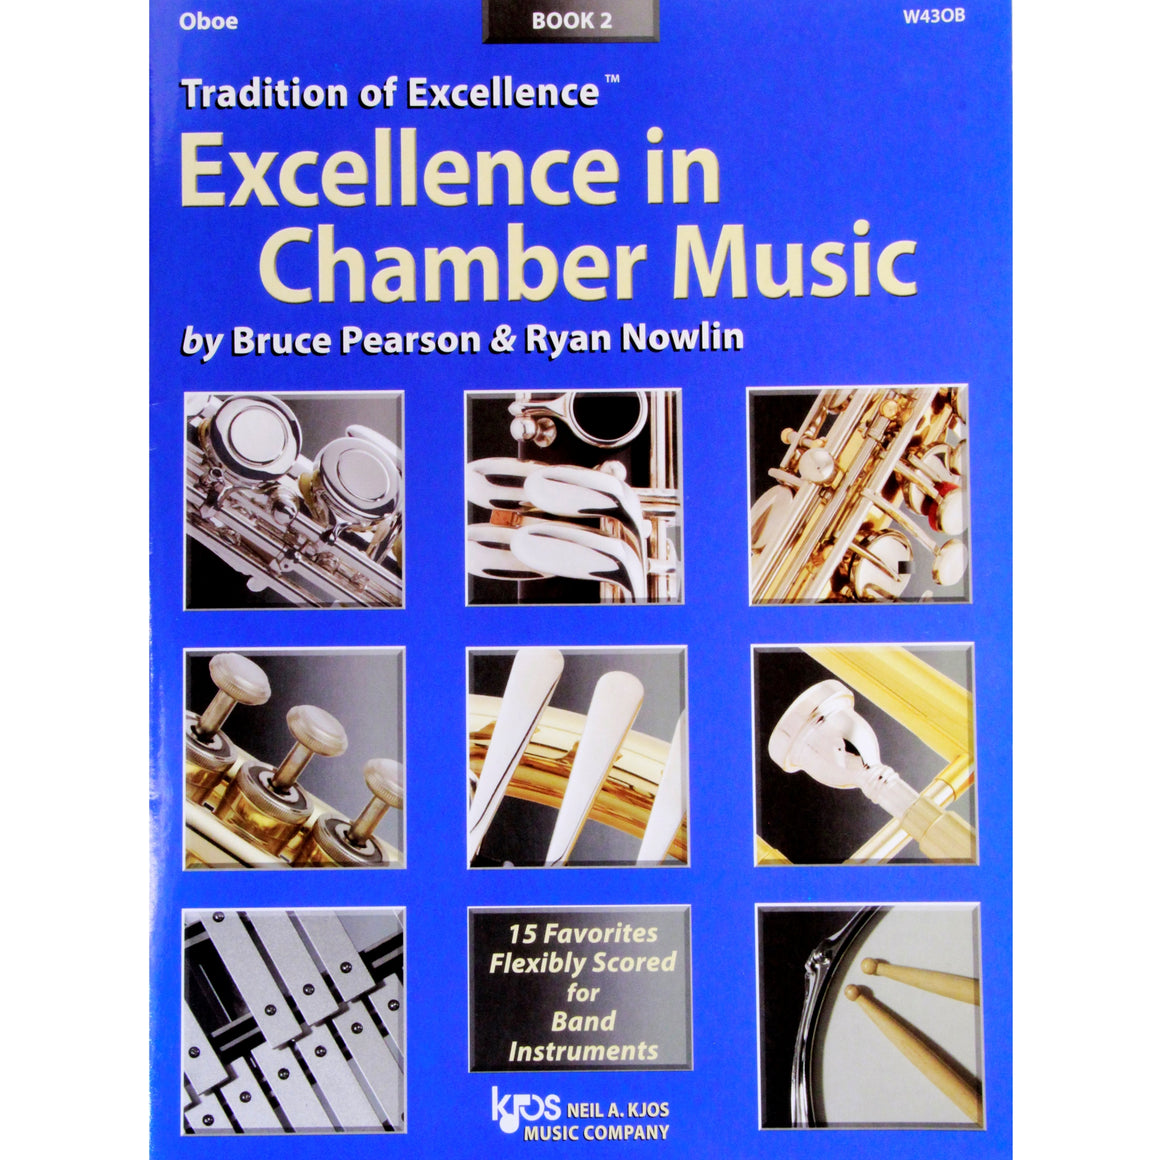 KJOS W43OB TOE Excellence in Chamber Music Book 2 Oboe